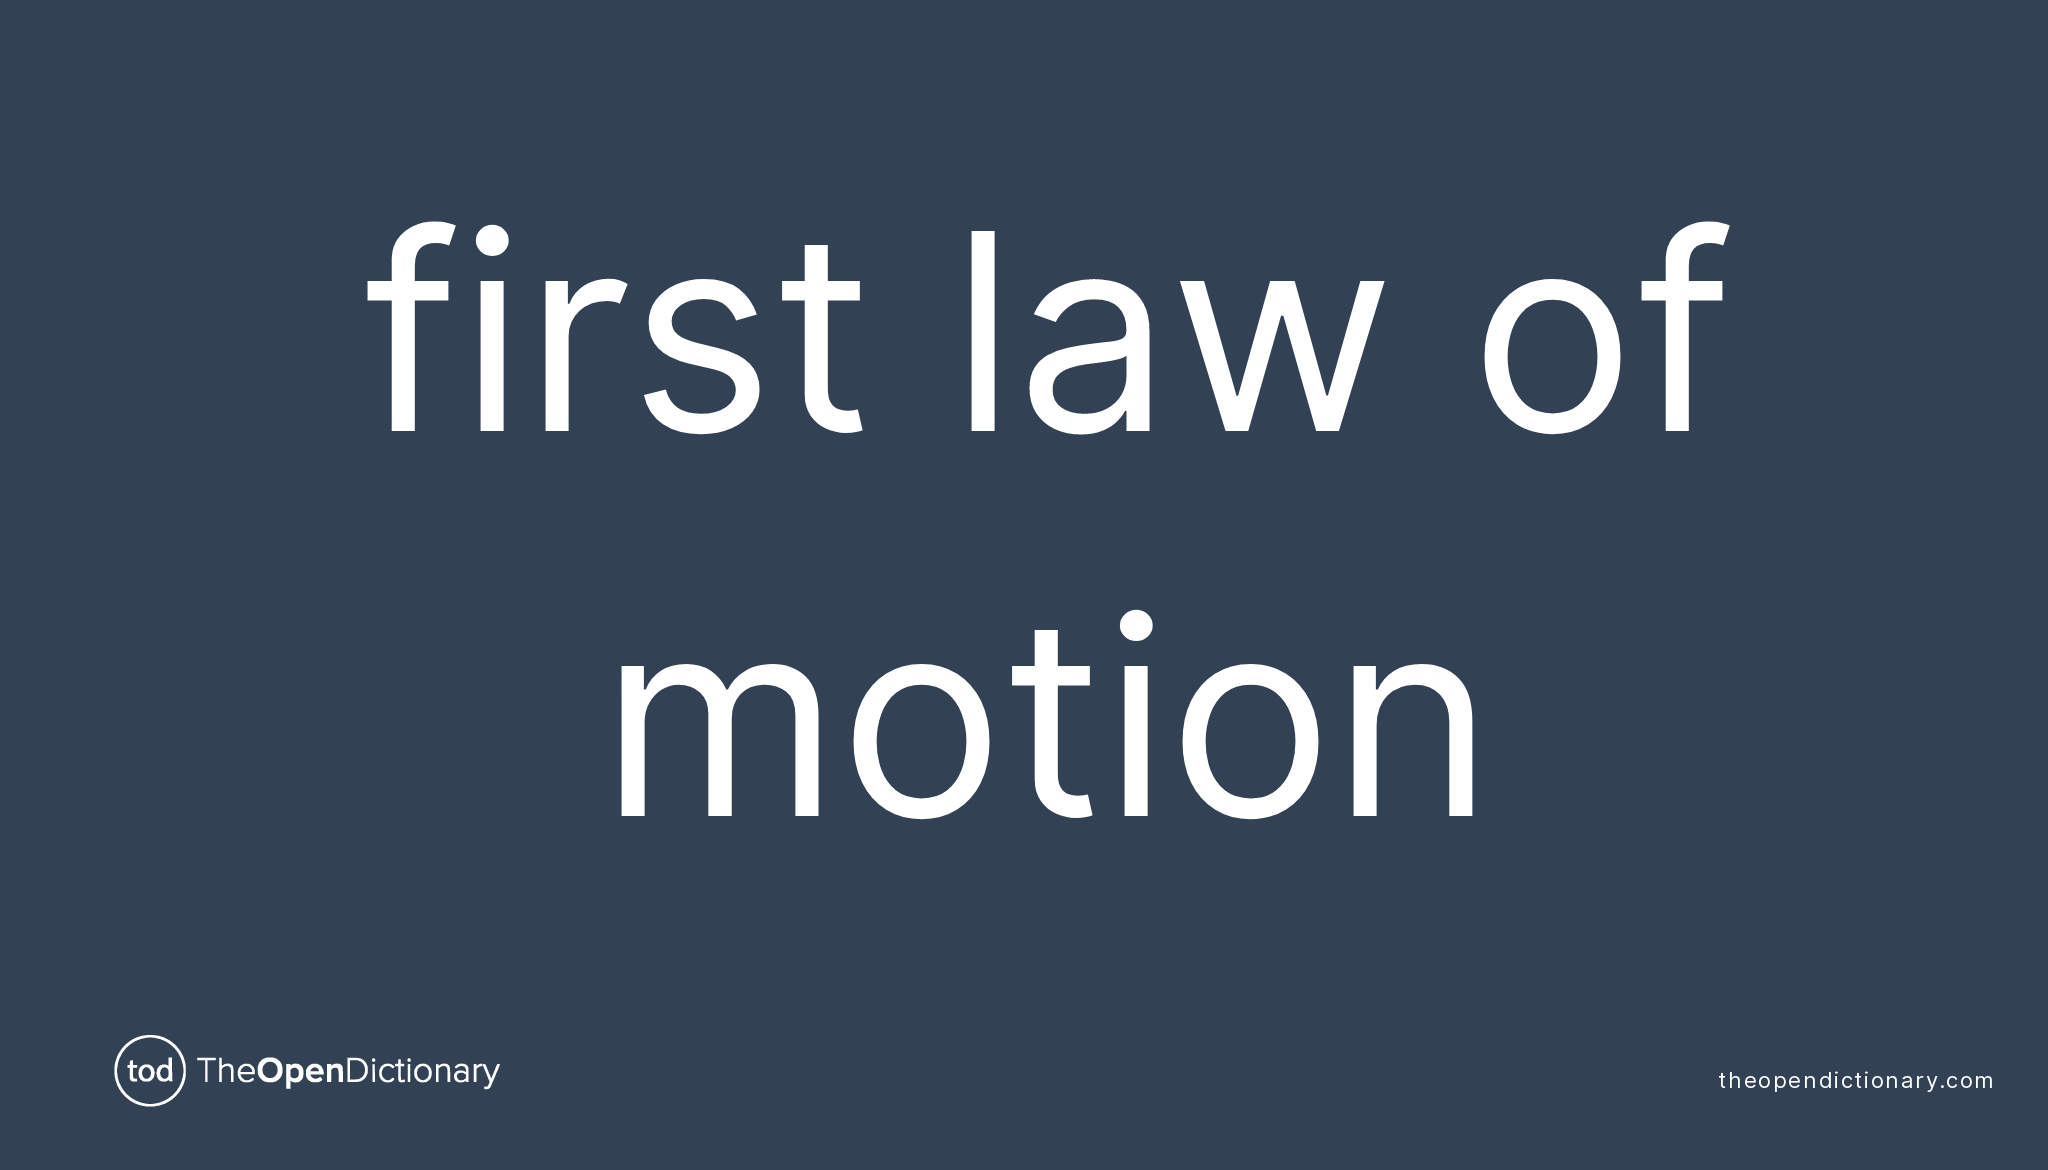 first-law-of-motion-meaning-of-first-law-of-motion-definition-of